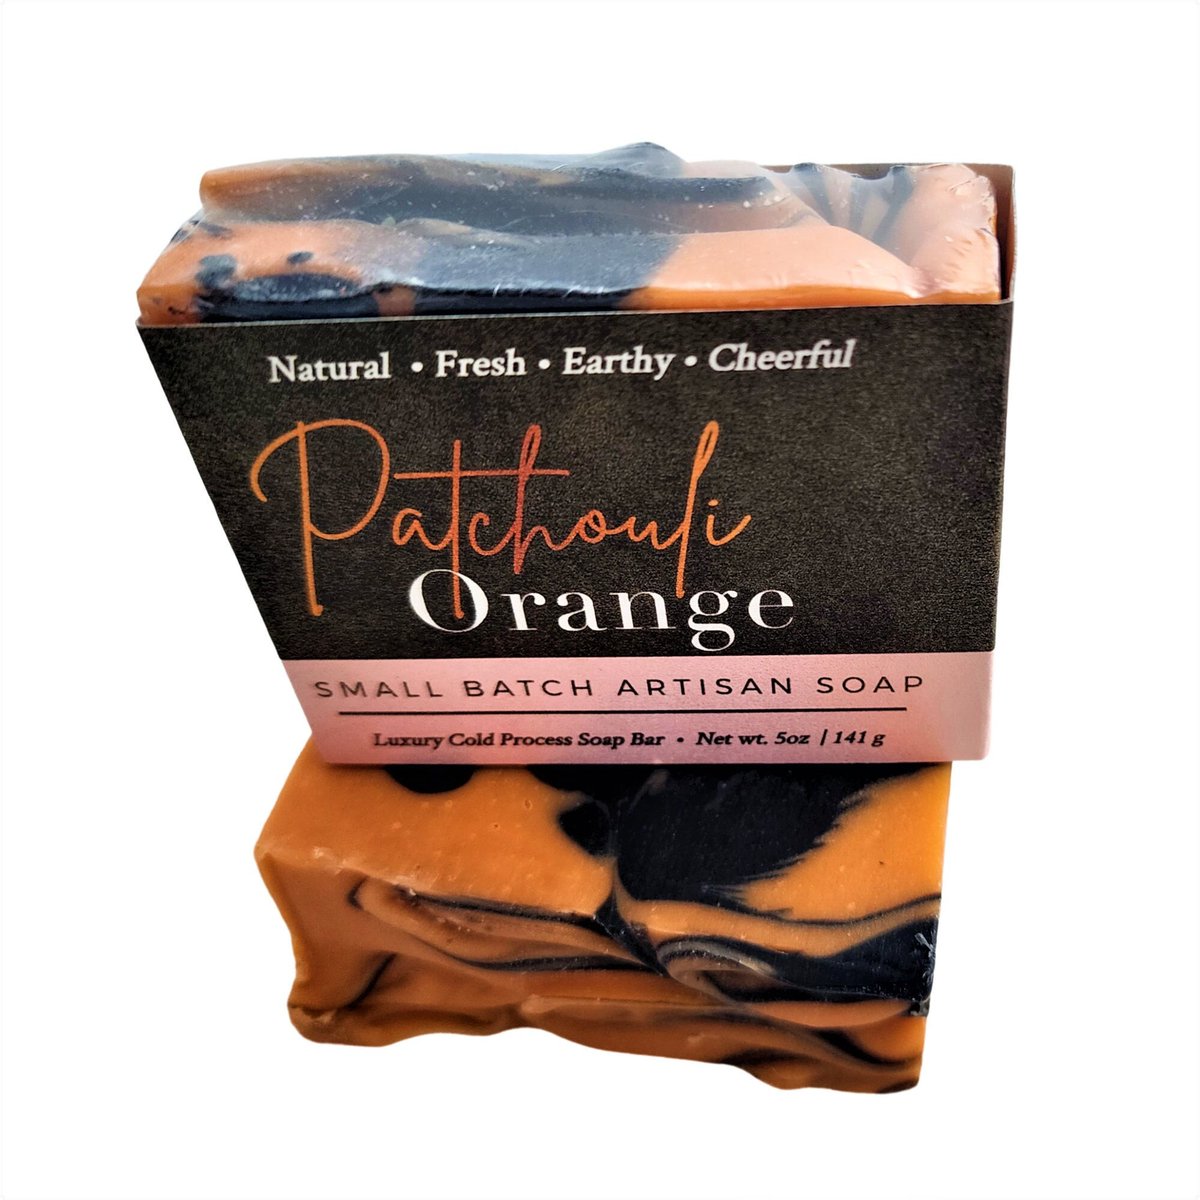 Patchouli Orange Soap, Patchouli Soap, Orange Soap, Natural Soap, Activated Charcoal Soap, Vegan Soap, Cold Process Soap, Soap Gift tuppu.net/b441b571 #Etsy #soap #shopsmall #Christmasgifts #gifts #selfcare #Soapgift #DeShawnMarie #HalloweenSoap